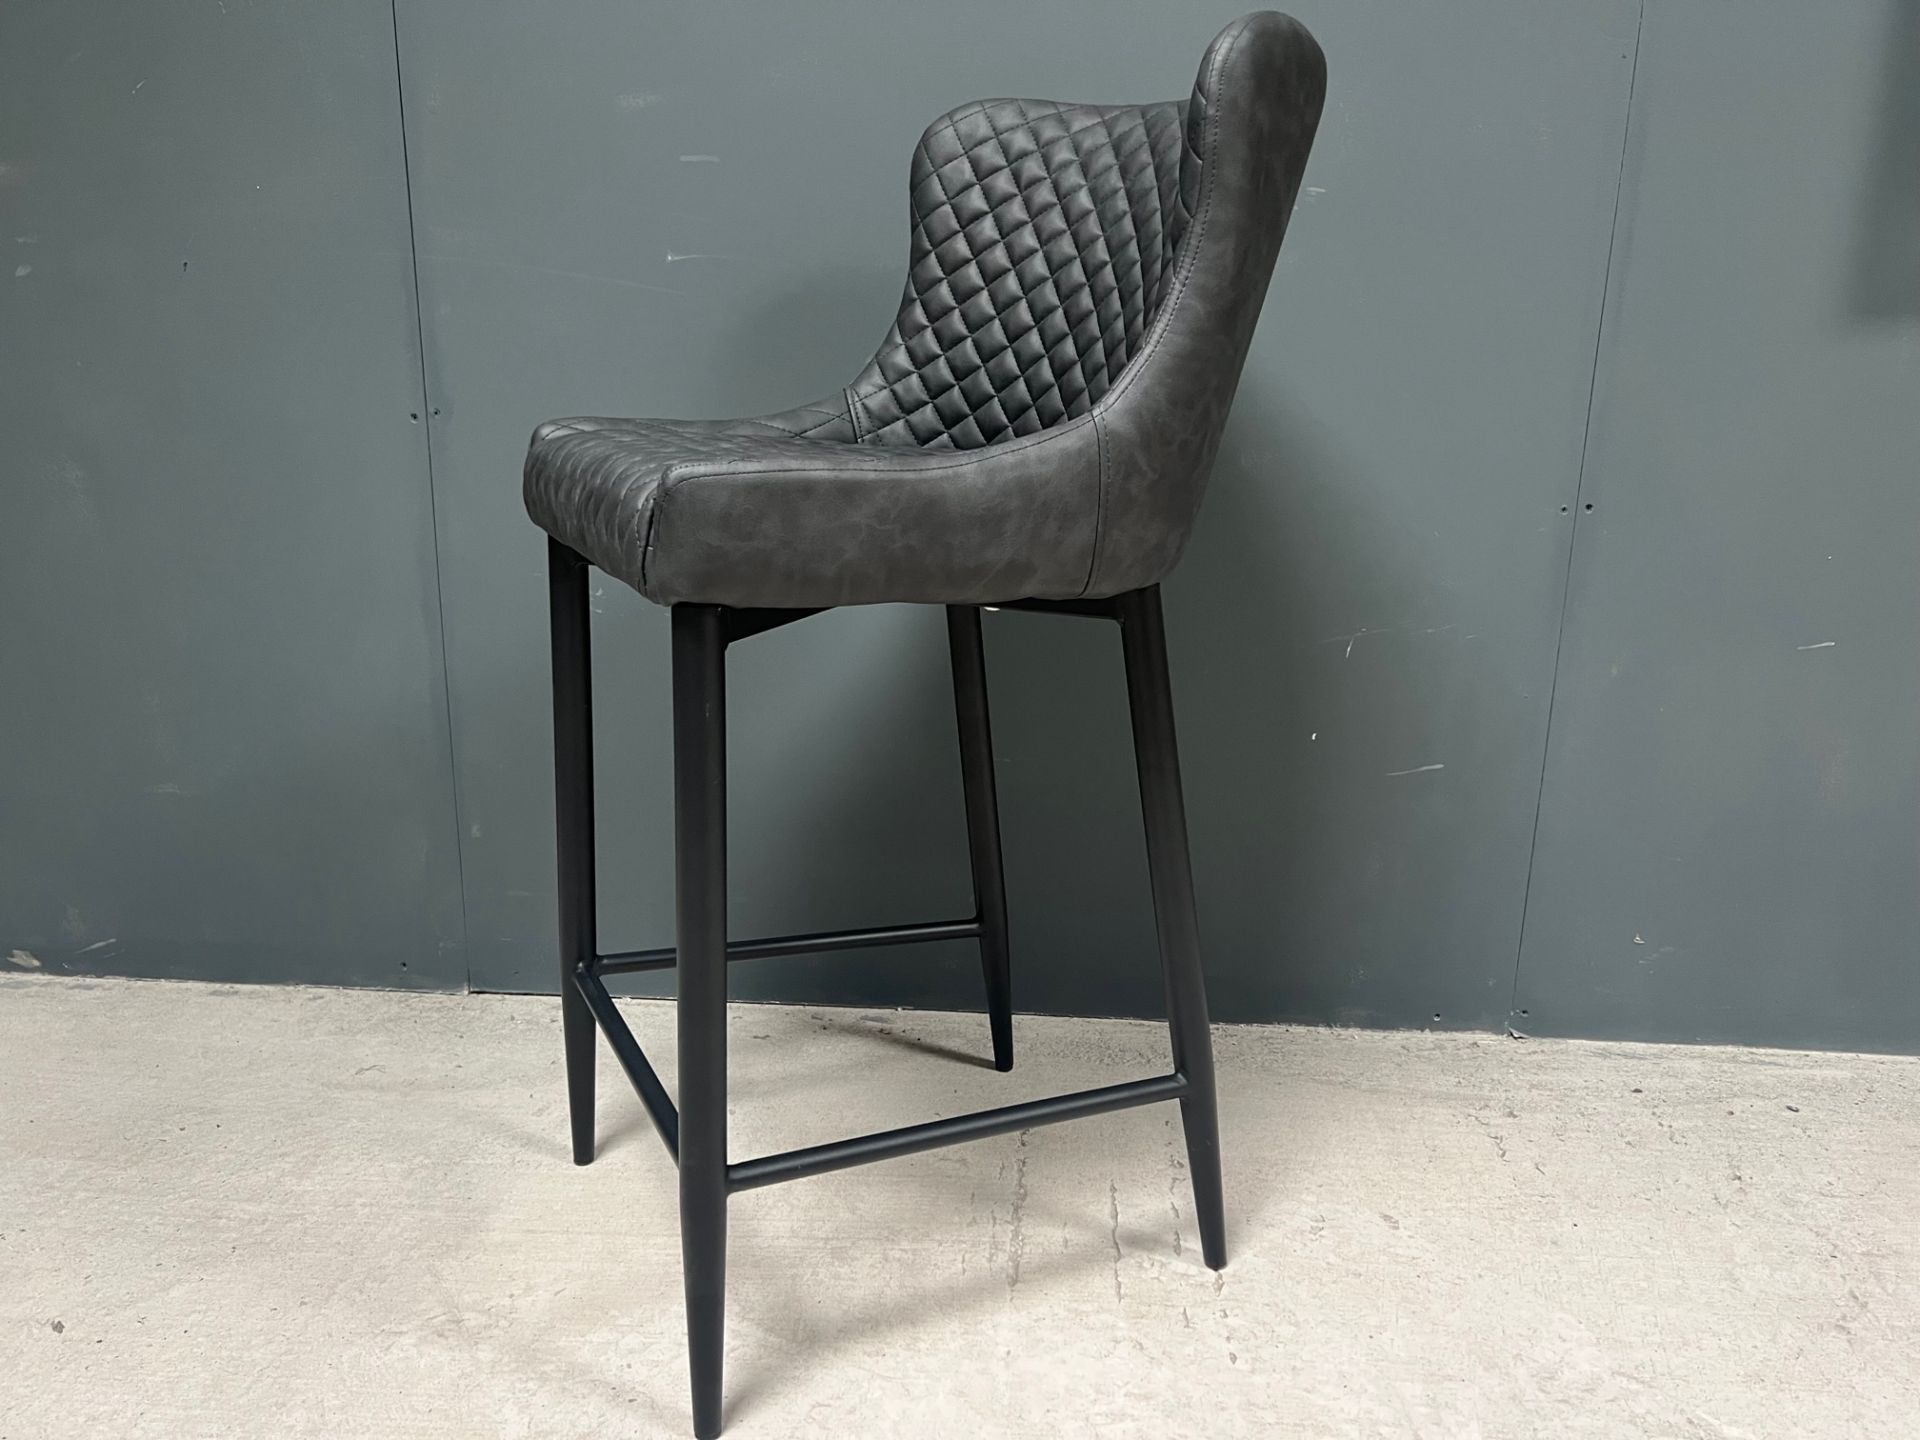 Boxed New Pair Of Classic Faux Leather High Bar Stools In Charcoal - Image 2 of 5